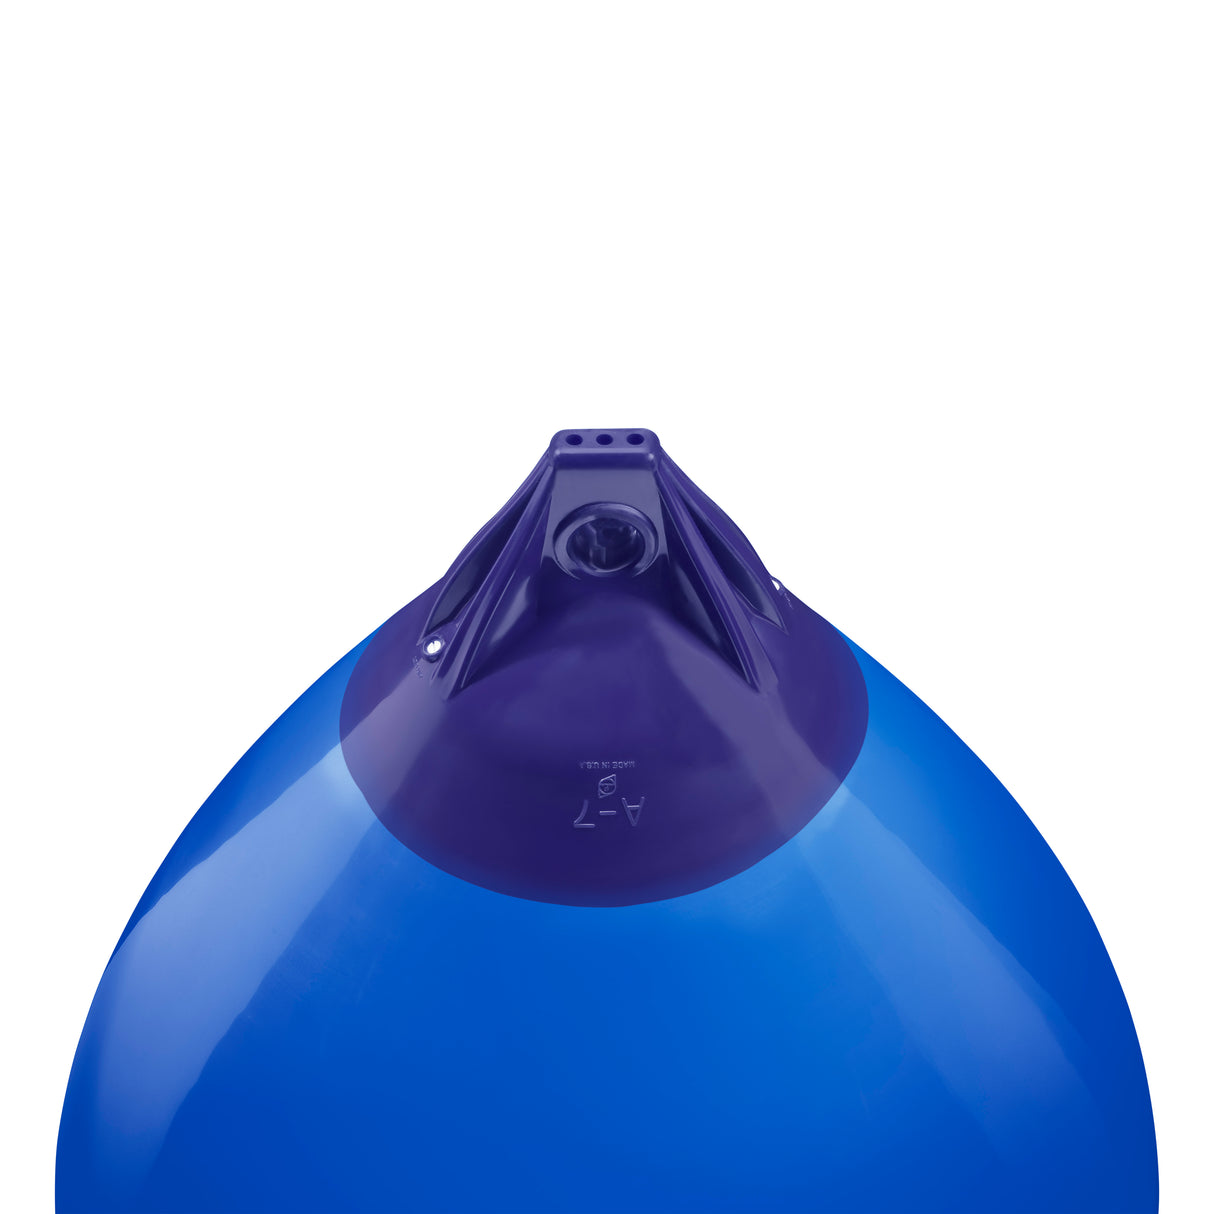 Blue inflatable buoy, Polyform A-7 angled shot